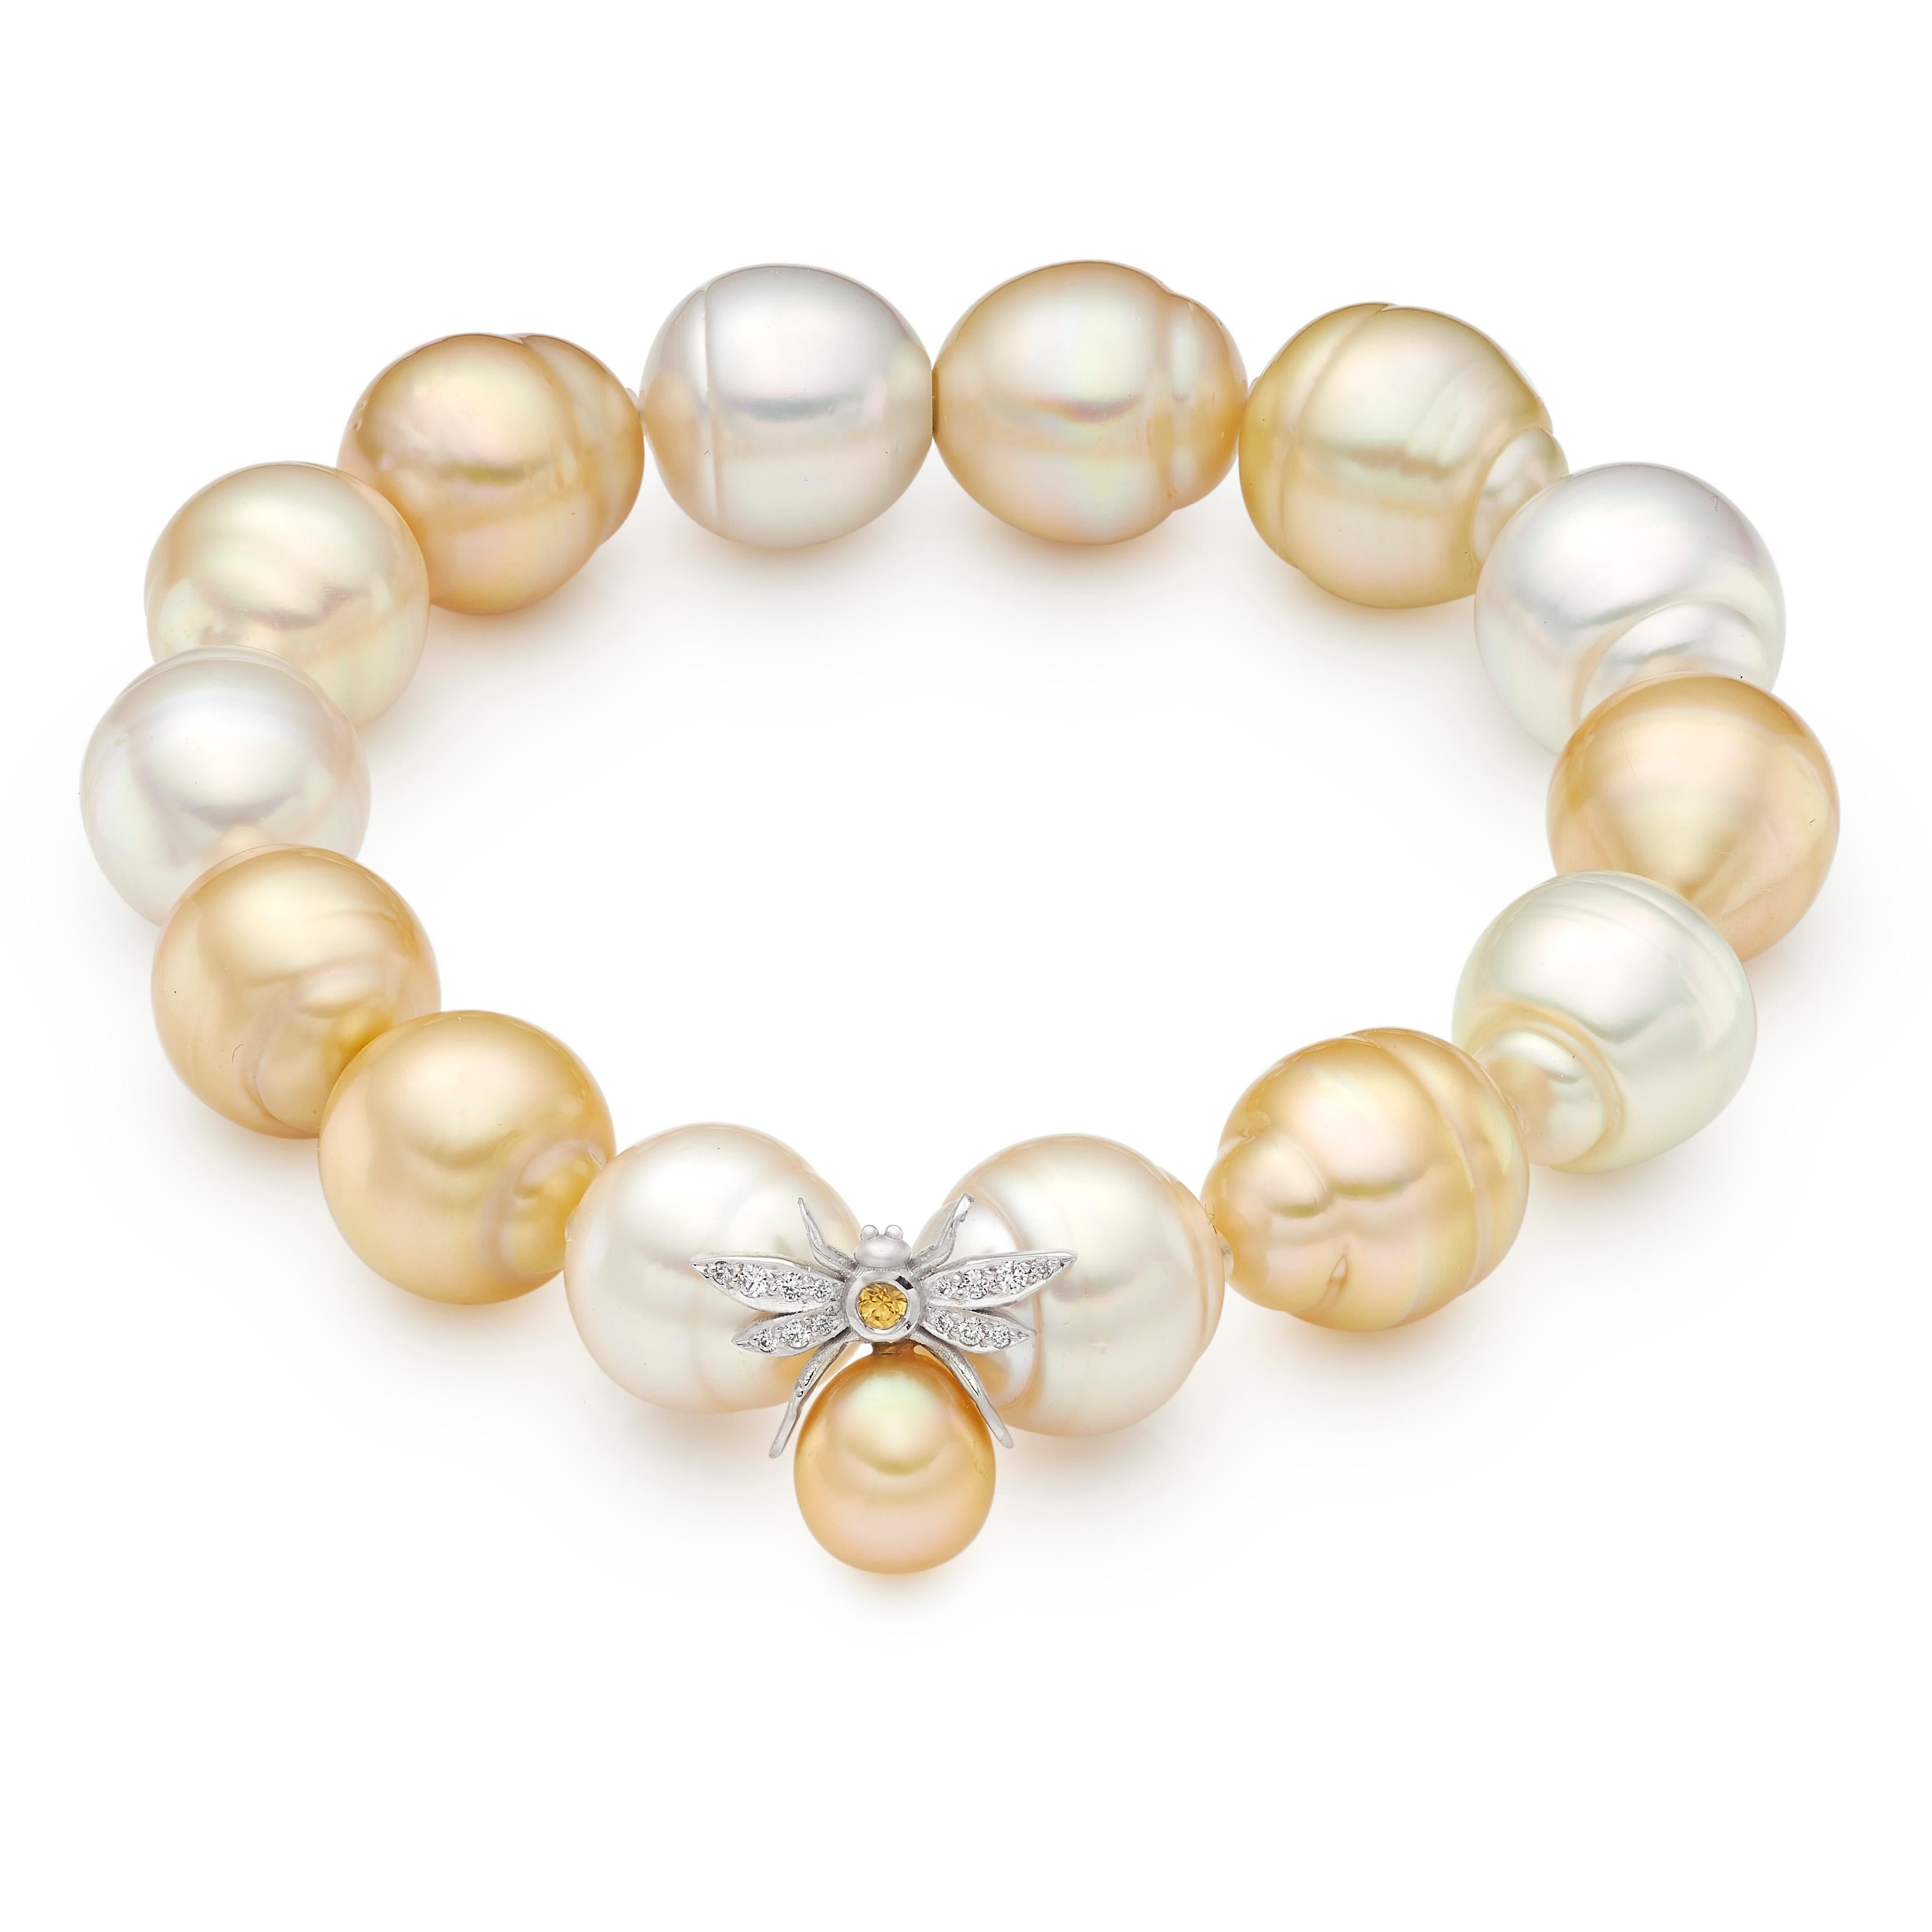 Pearl bracelet from Lilly Hastedt's 